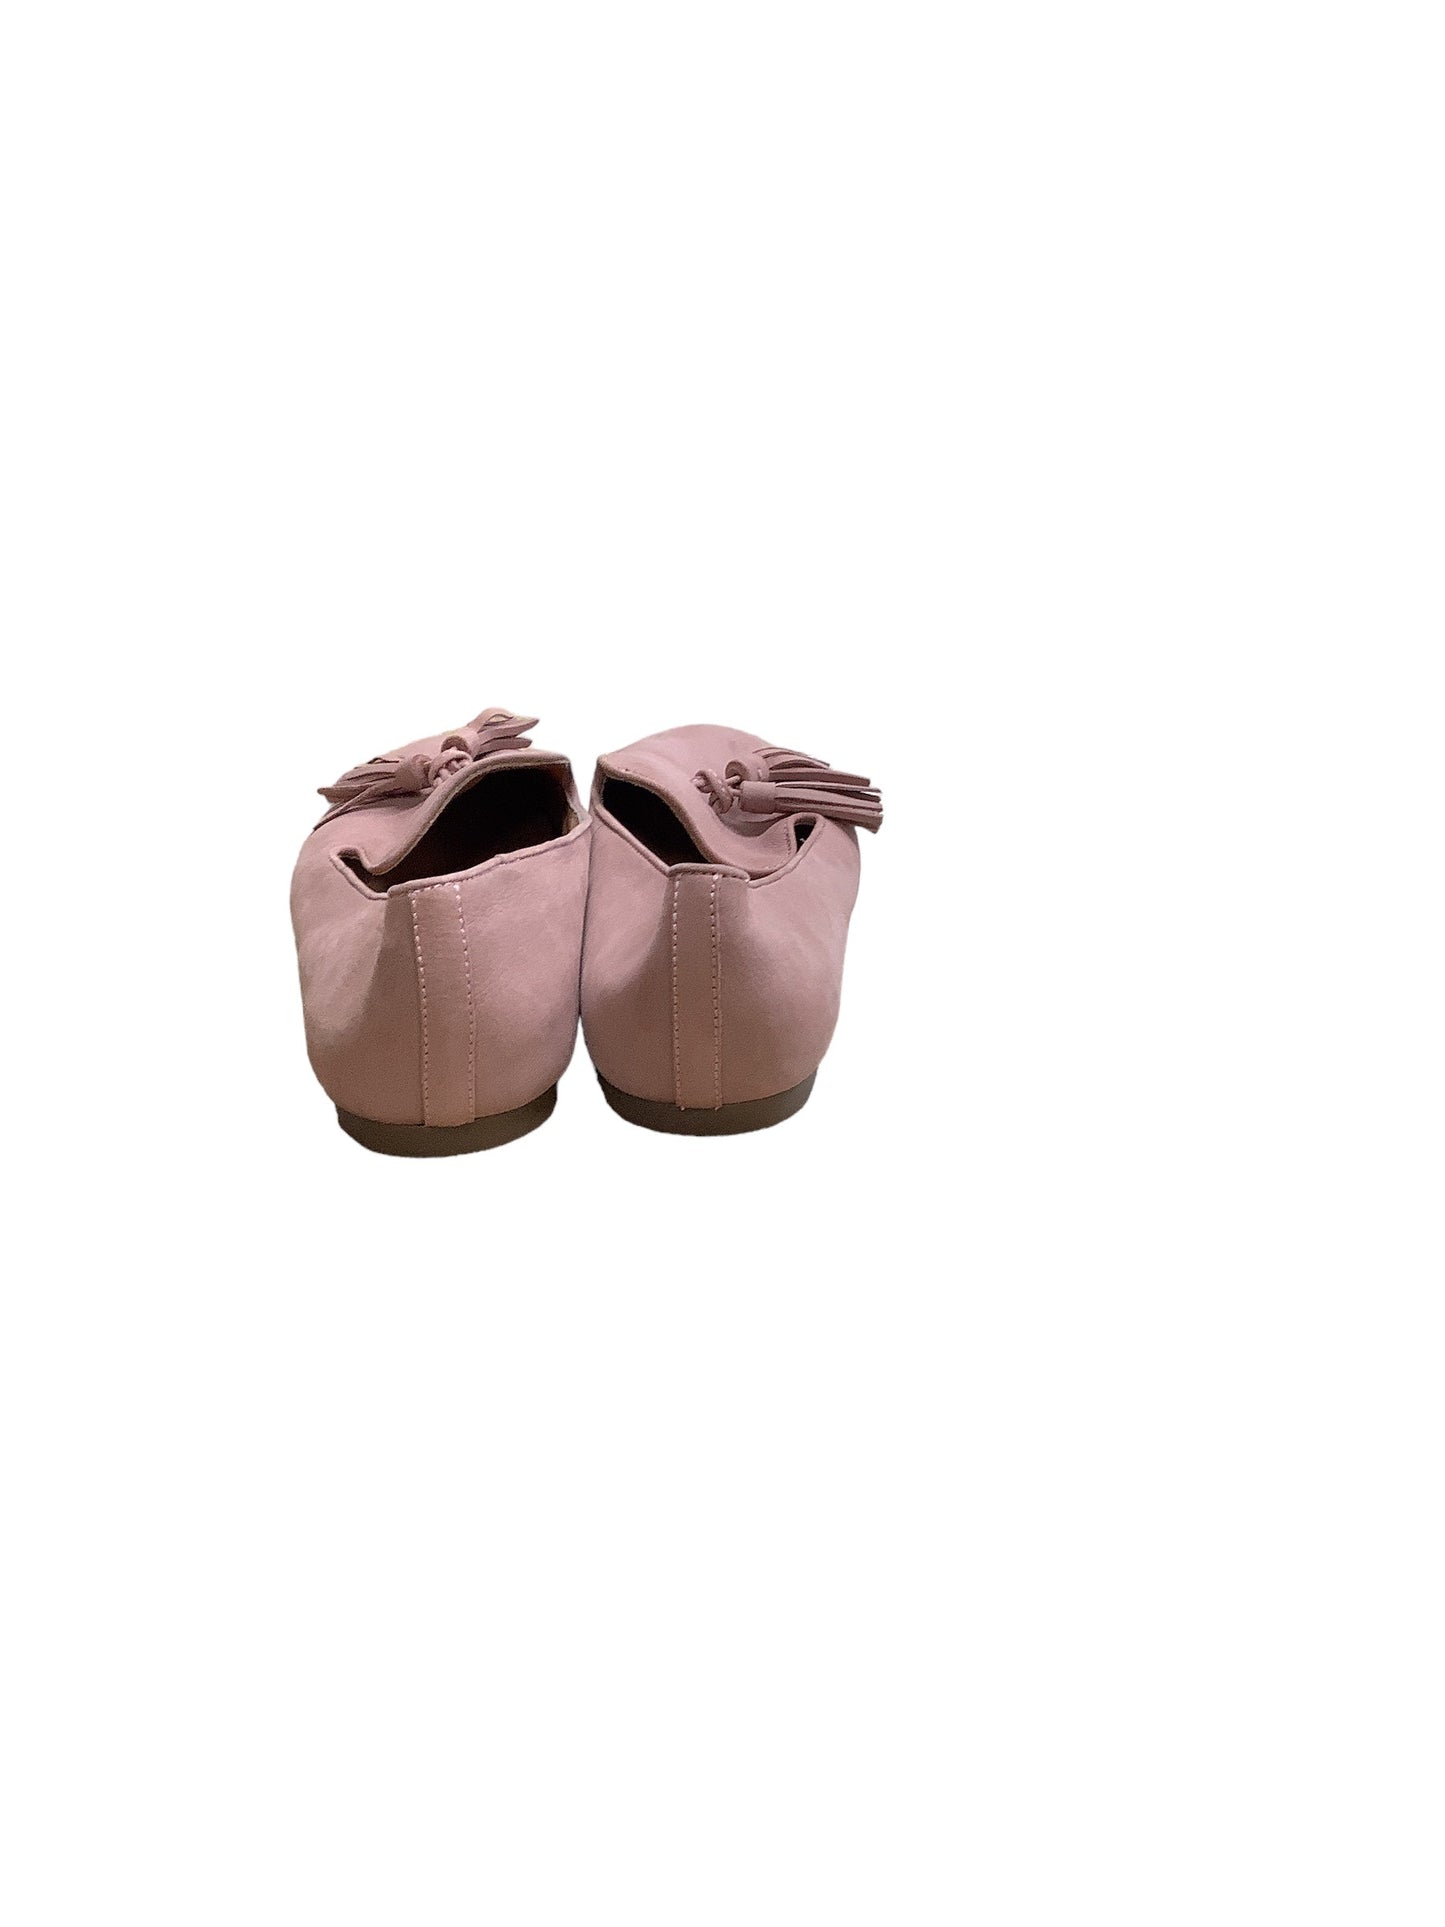 Shoes Flats By Gentle Souls  Size: 8